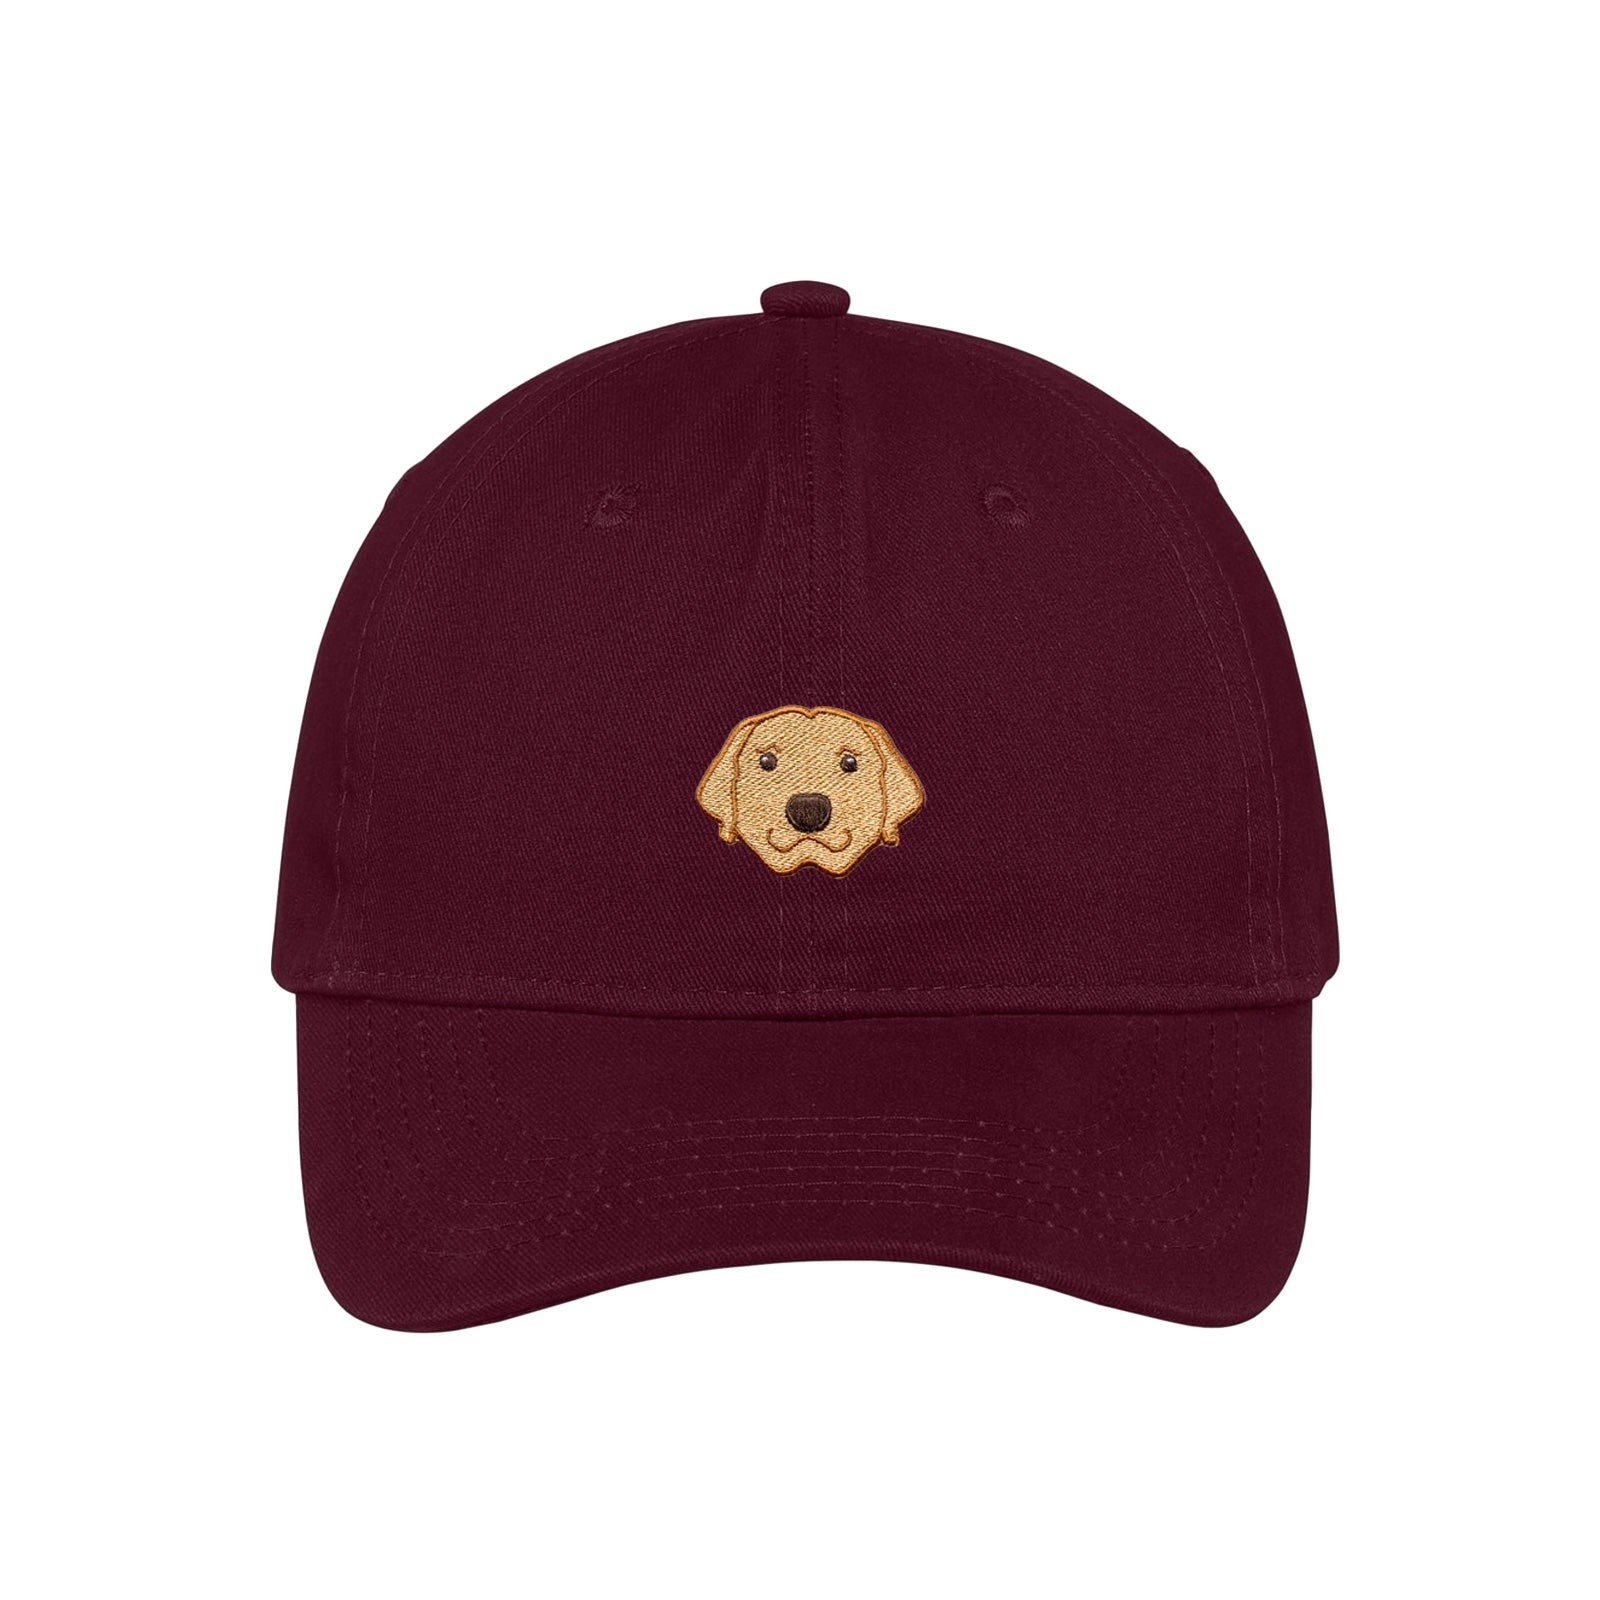 Maroon custom dog dad hats customized with your dog's face embroidered on the front.